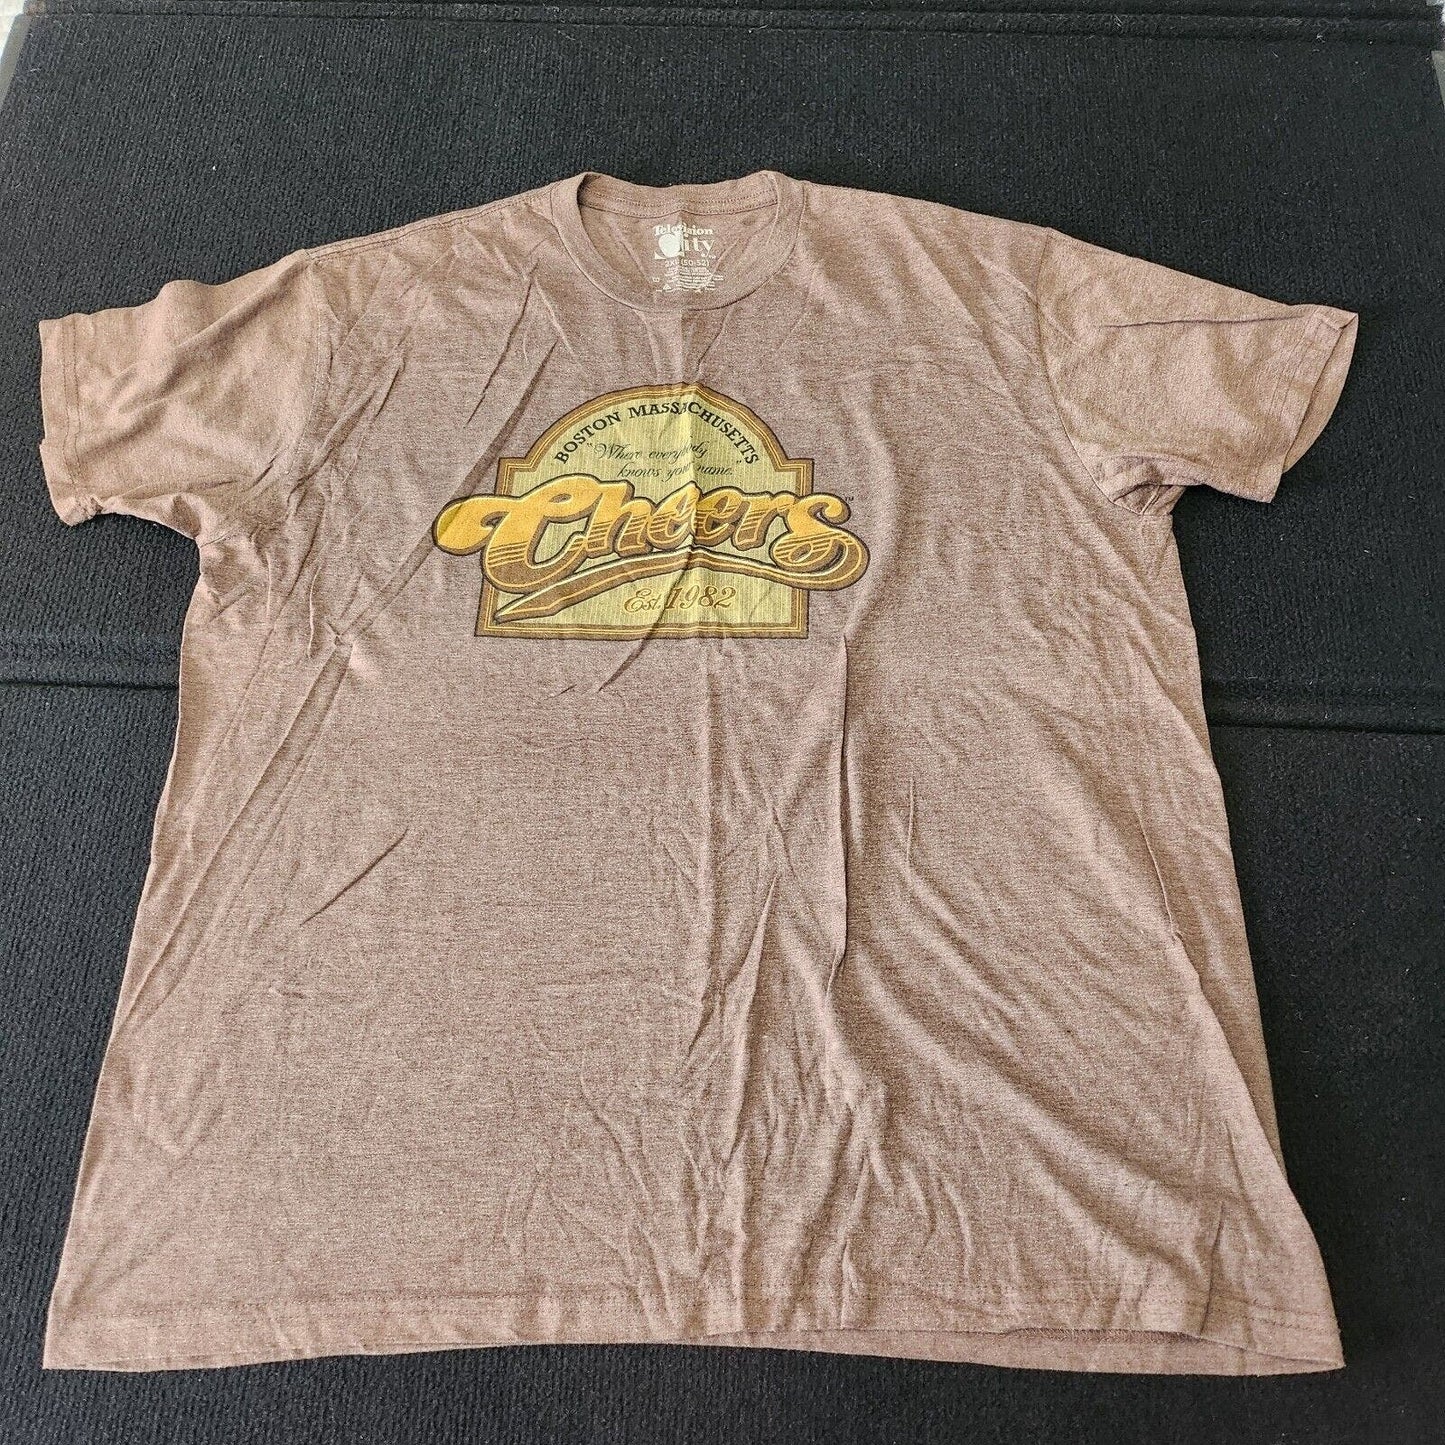 Brown Cheers 2XL Graphic T-Shirt Front and Back Graphic Tee